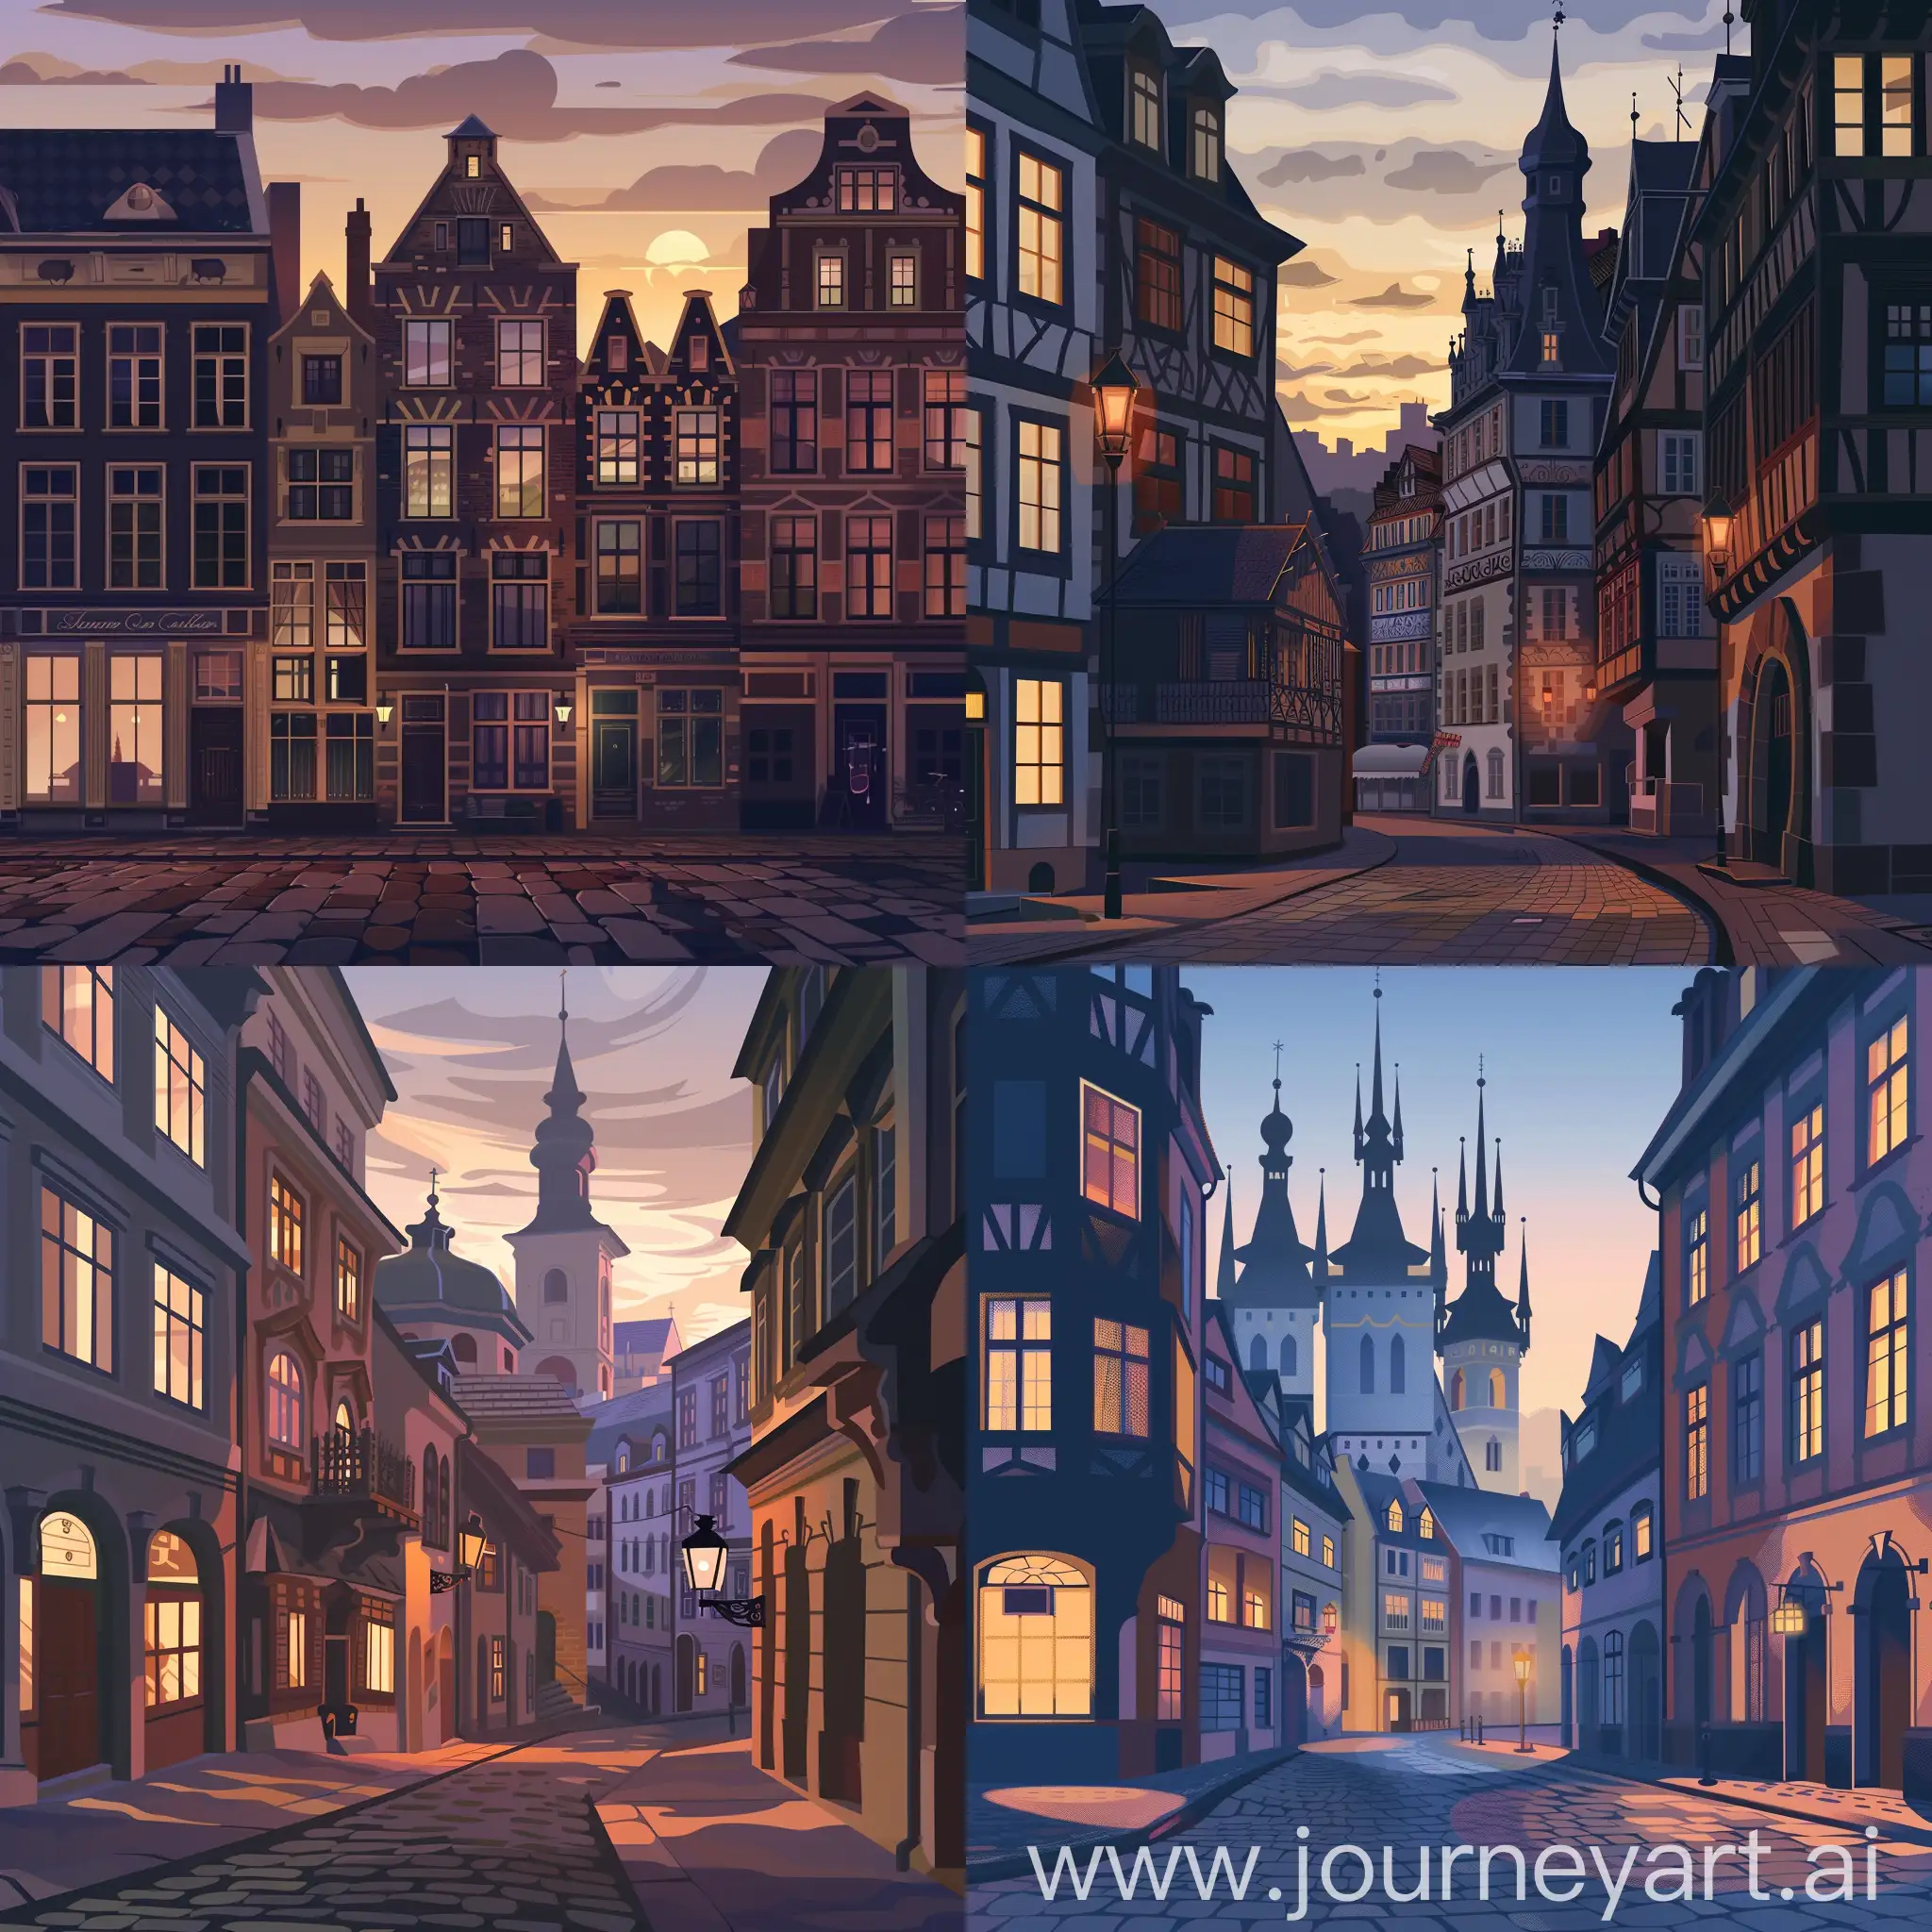 A historic European city at twilight, its ancient buildings and cobblestone streets bathed in the warm glow of the setting sun The city's architecture, a tapestry of different periods and styles, tells a story of centuries past The image captures the romantic essence of the old world, a fusion of history and present-day, in high quality flat style